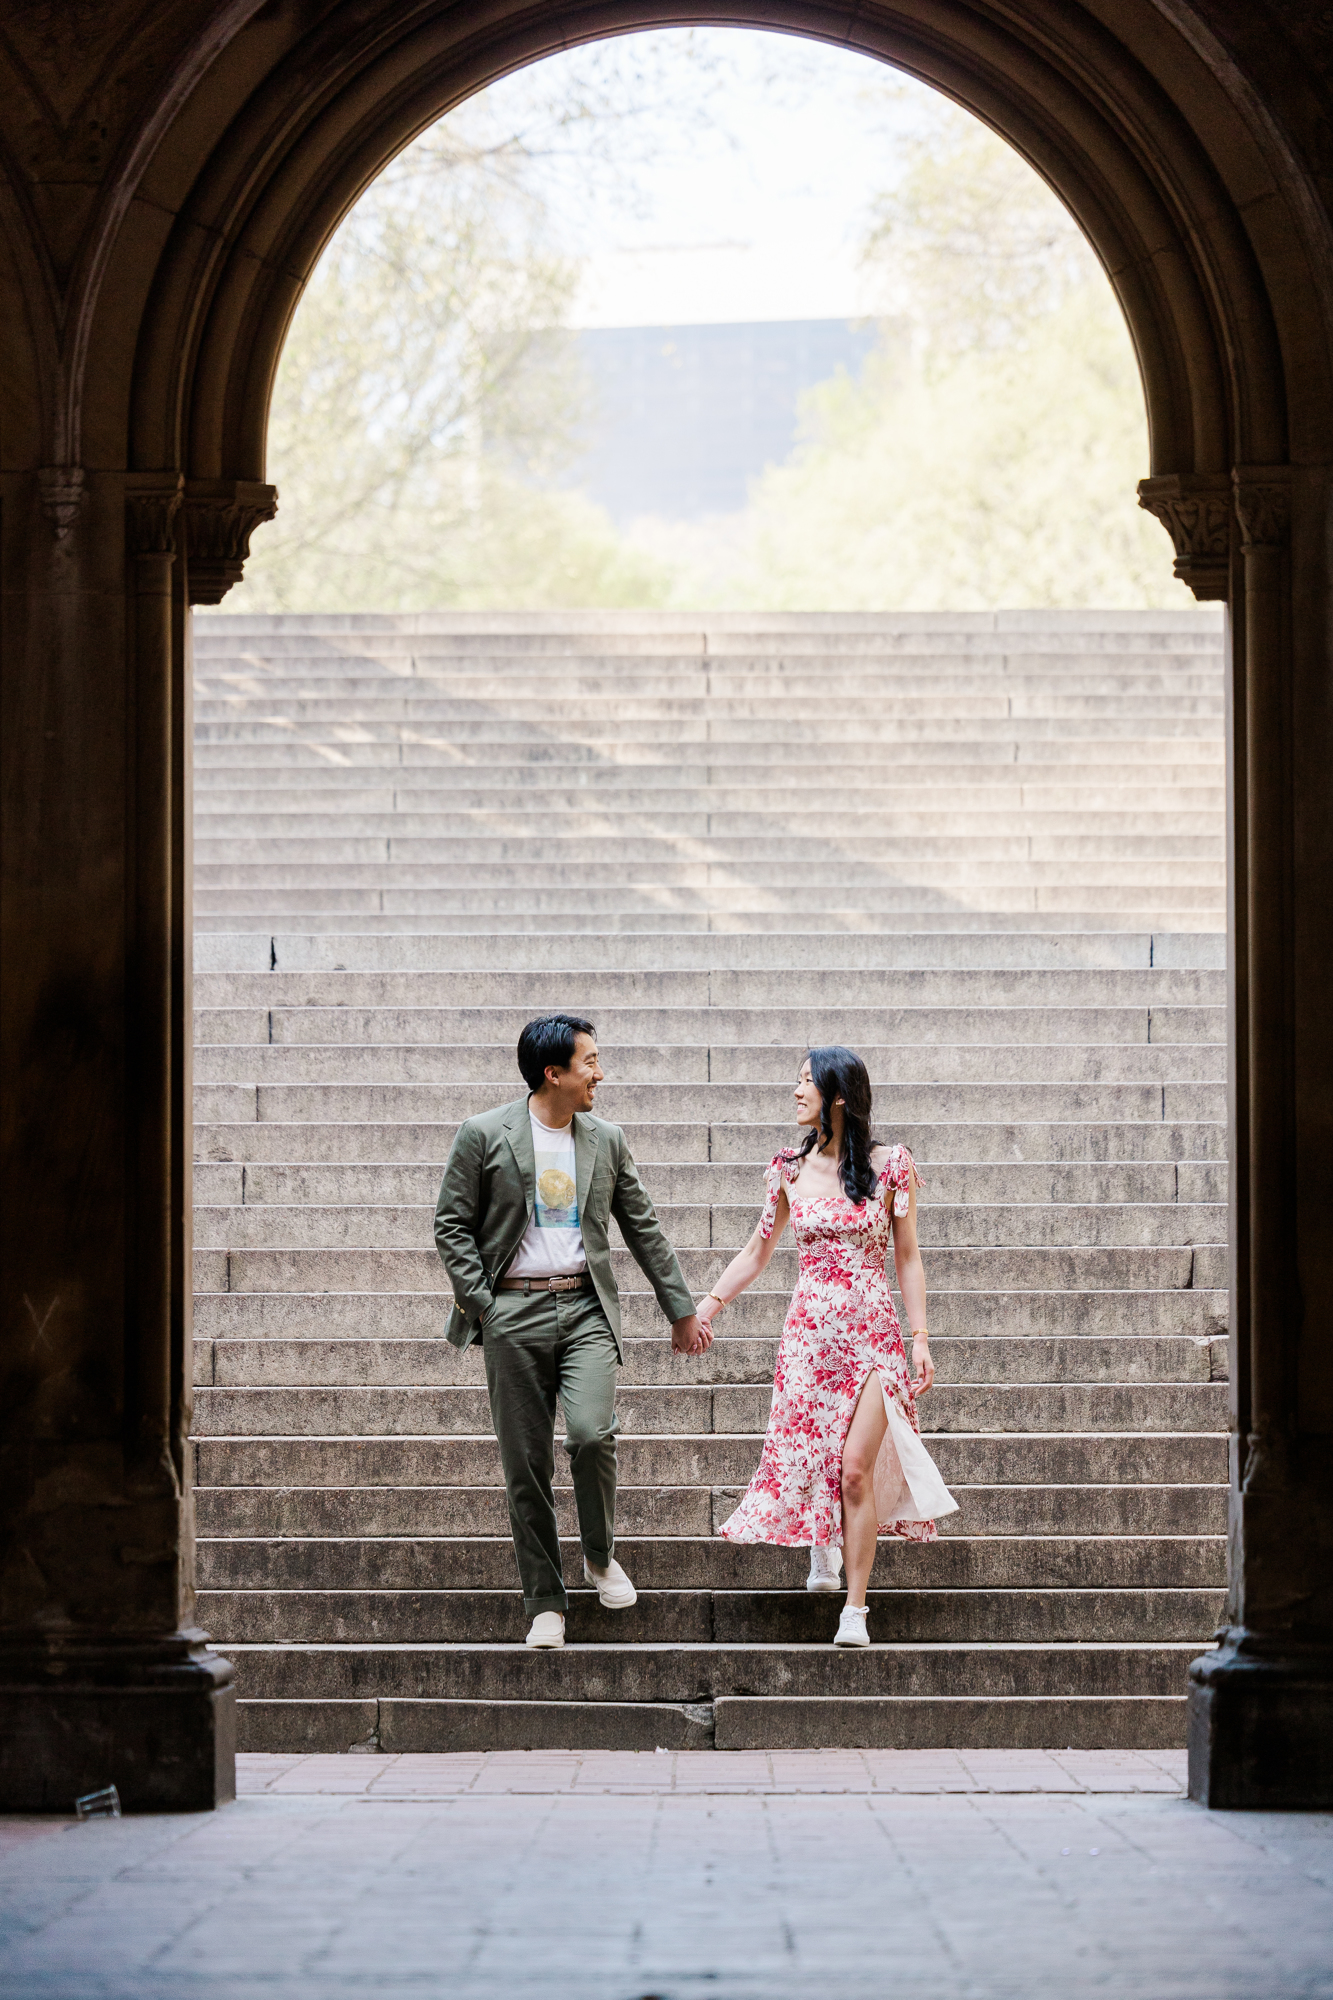 Breath - Taking Engagement Photos With Cherry Blossoms in NYC